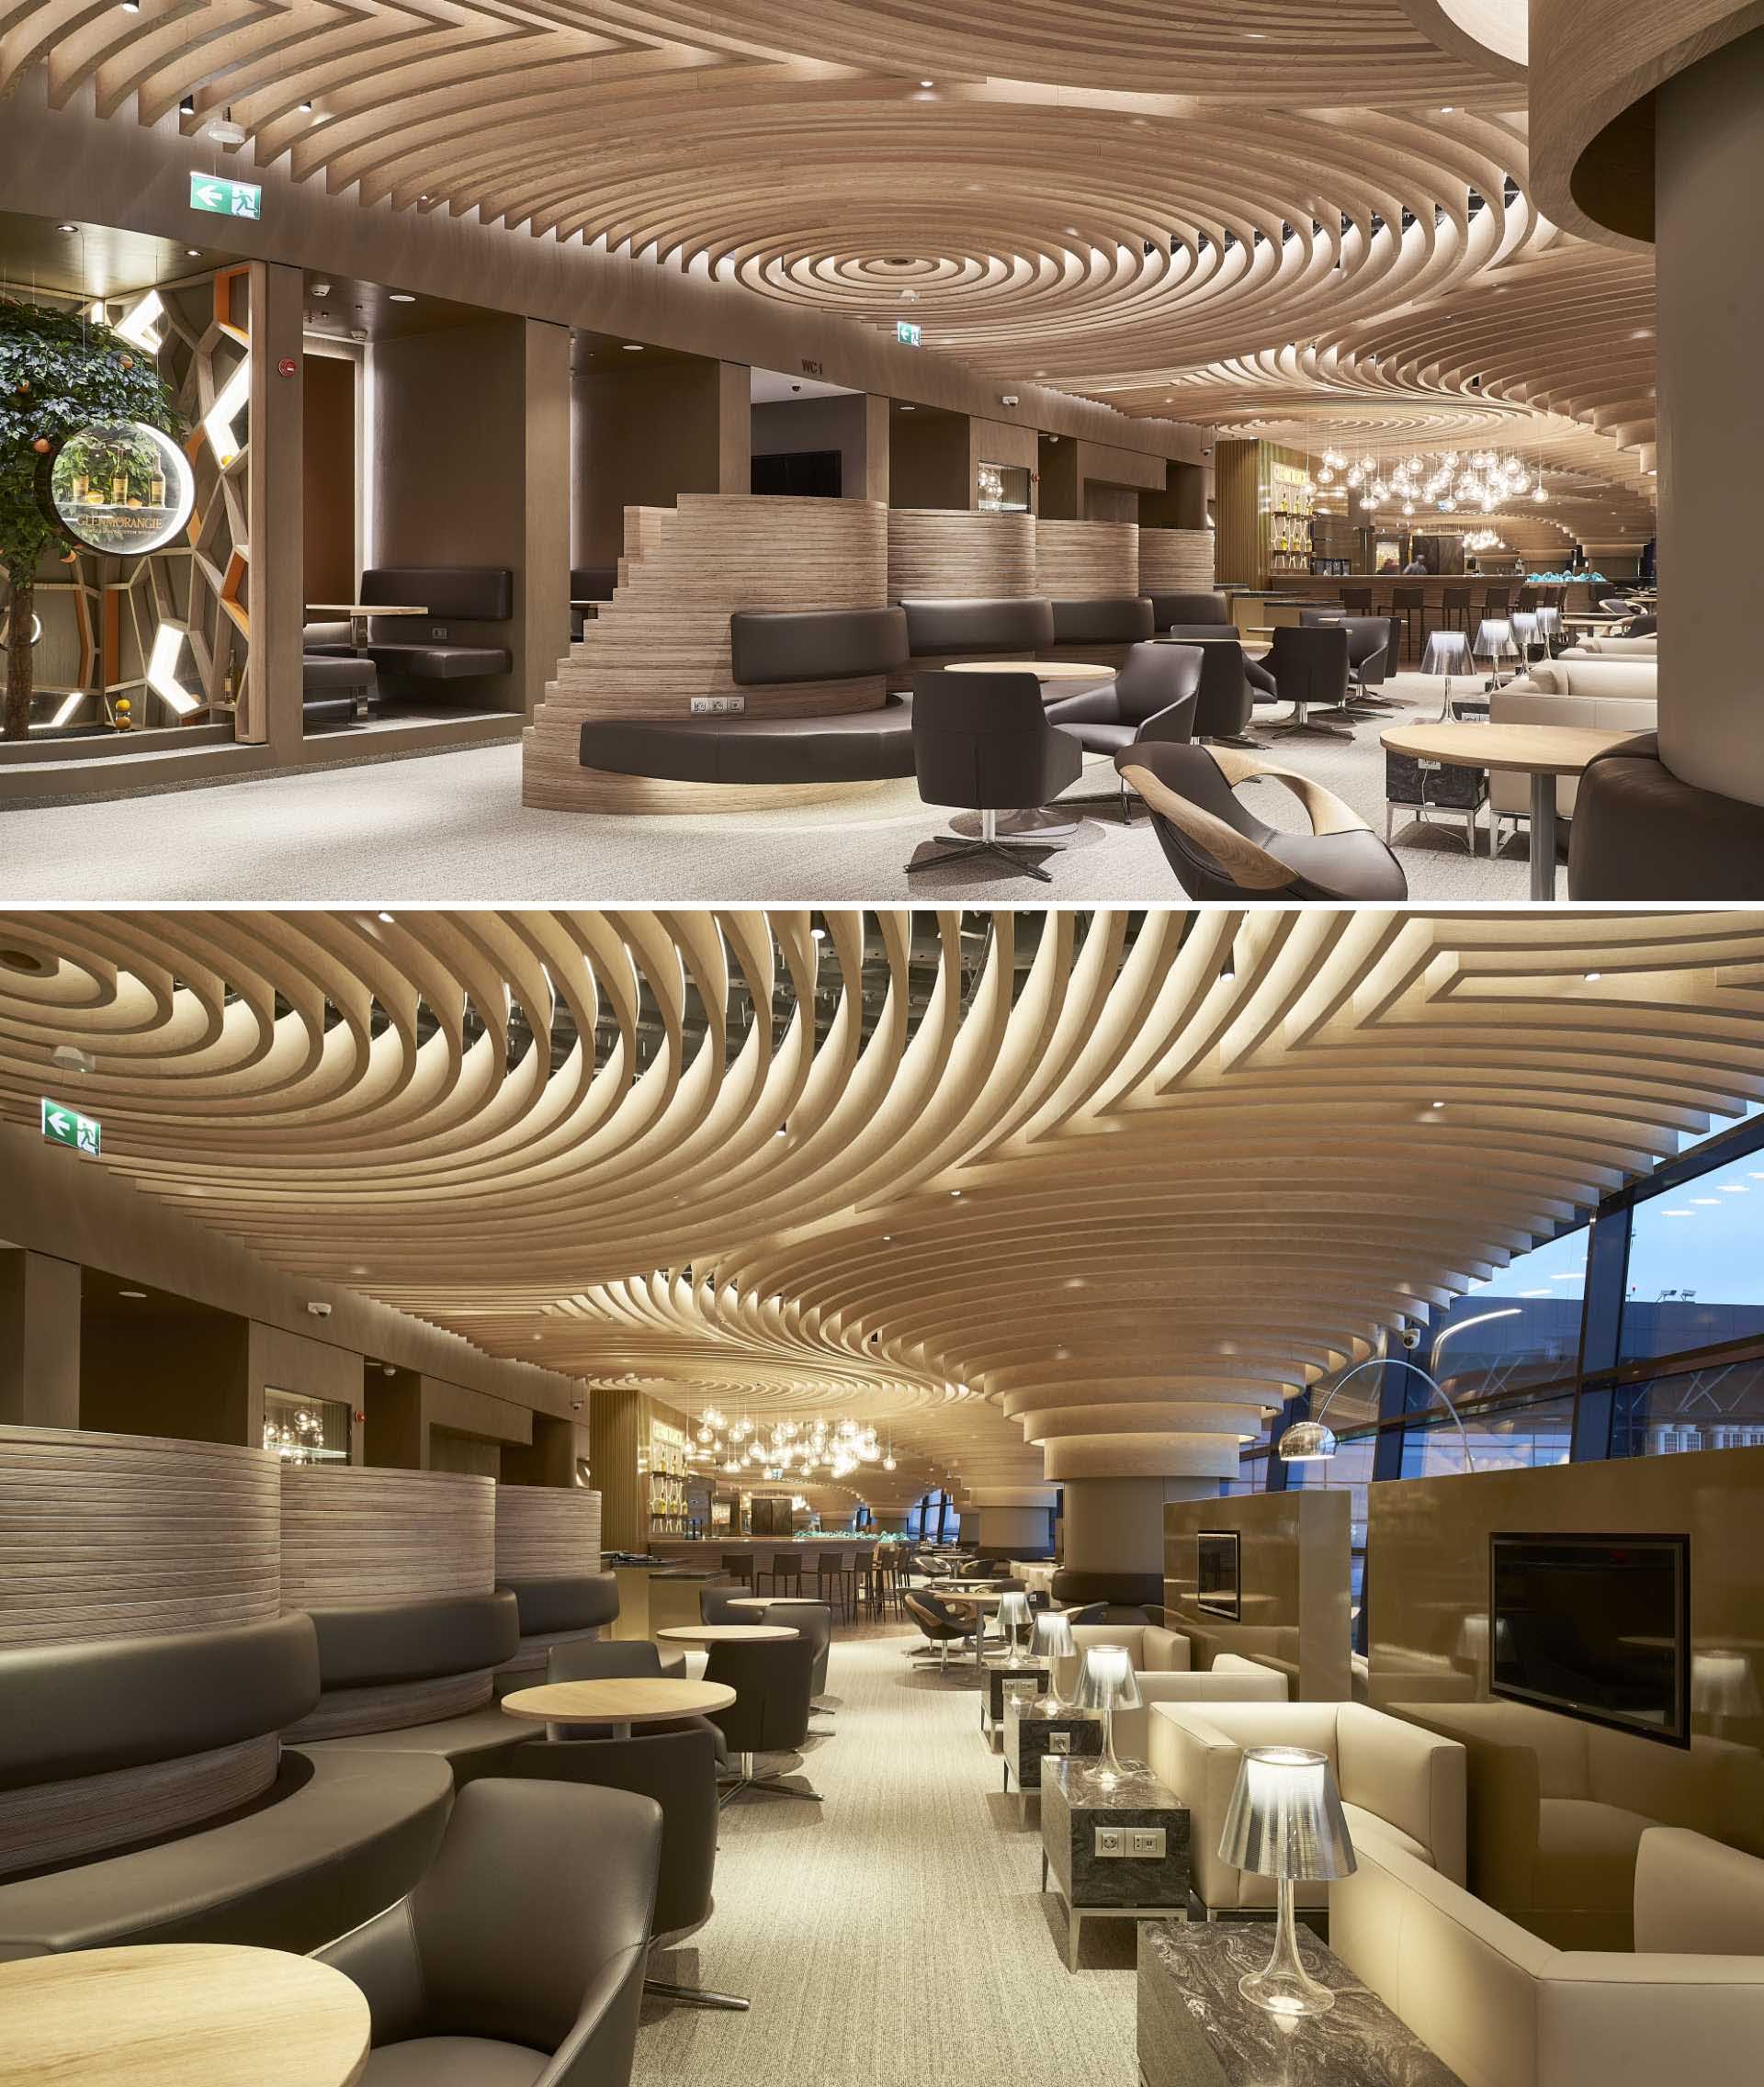 A modern airport lounge with a  sculptural wood ceiling that covers the entire space, spreading over various seating areas. 